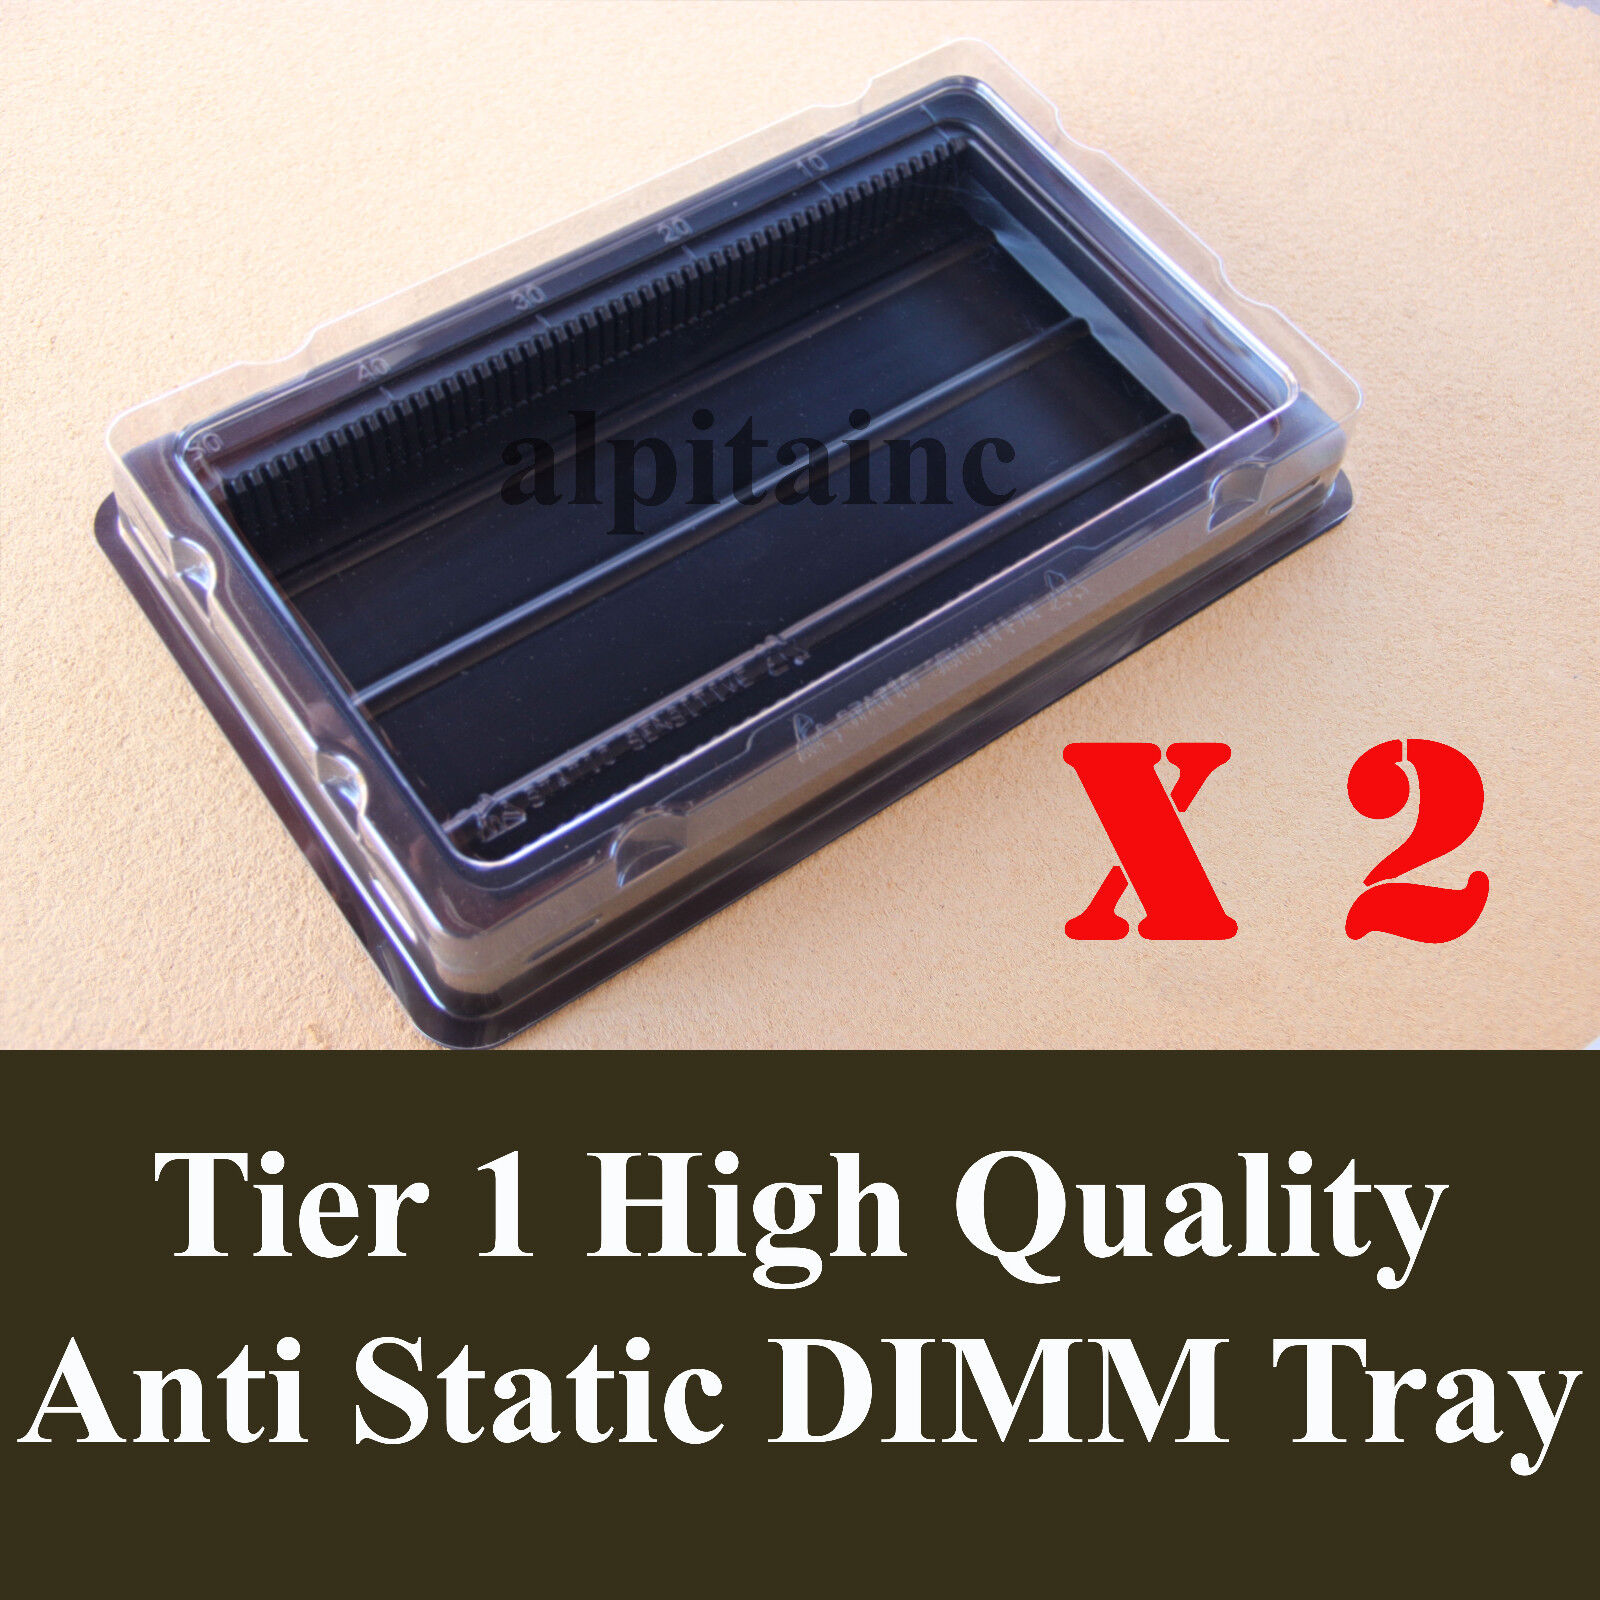 x2 ANTI STATIC DIMM Memory tray box container for Server/Desktop DDR2 DDR3, DDR4